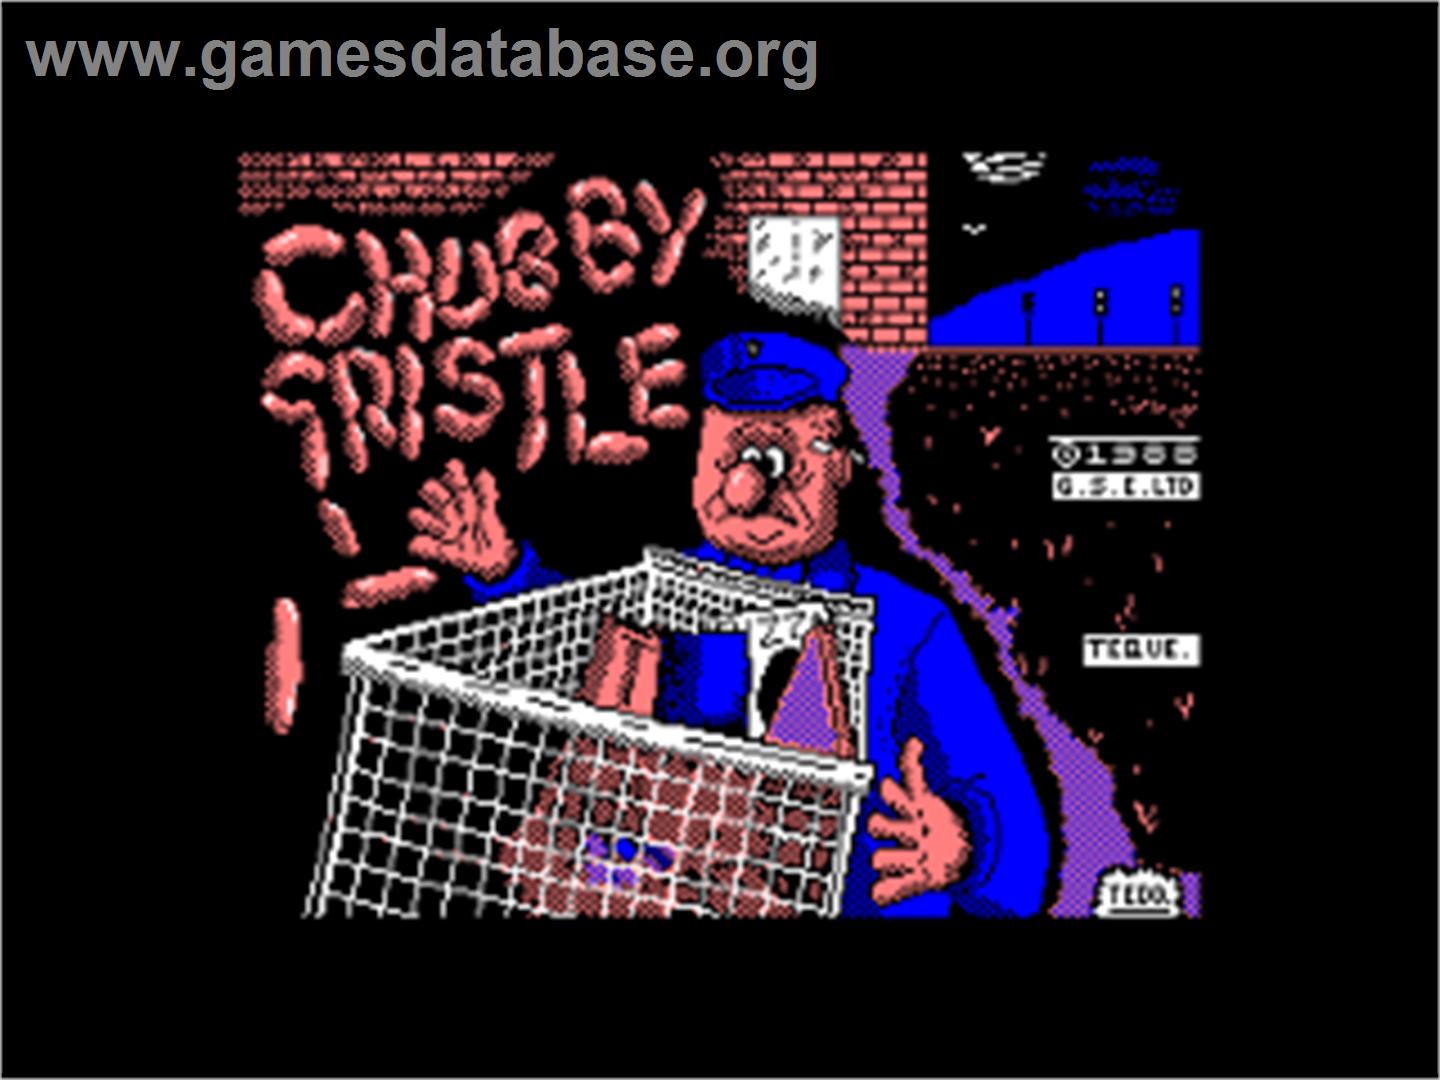 Chubby Gristle - Amstrad CPC - Artwork - Title Screen